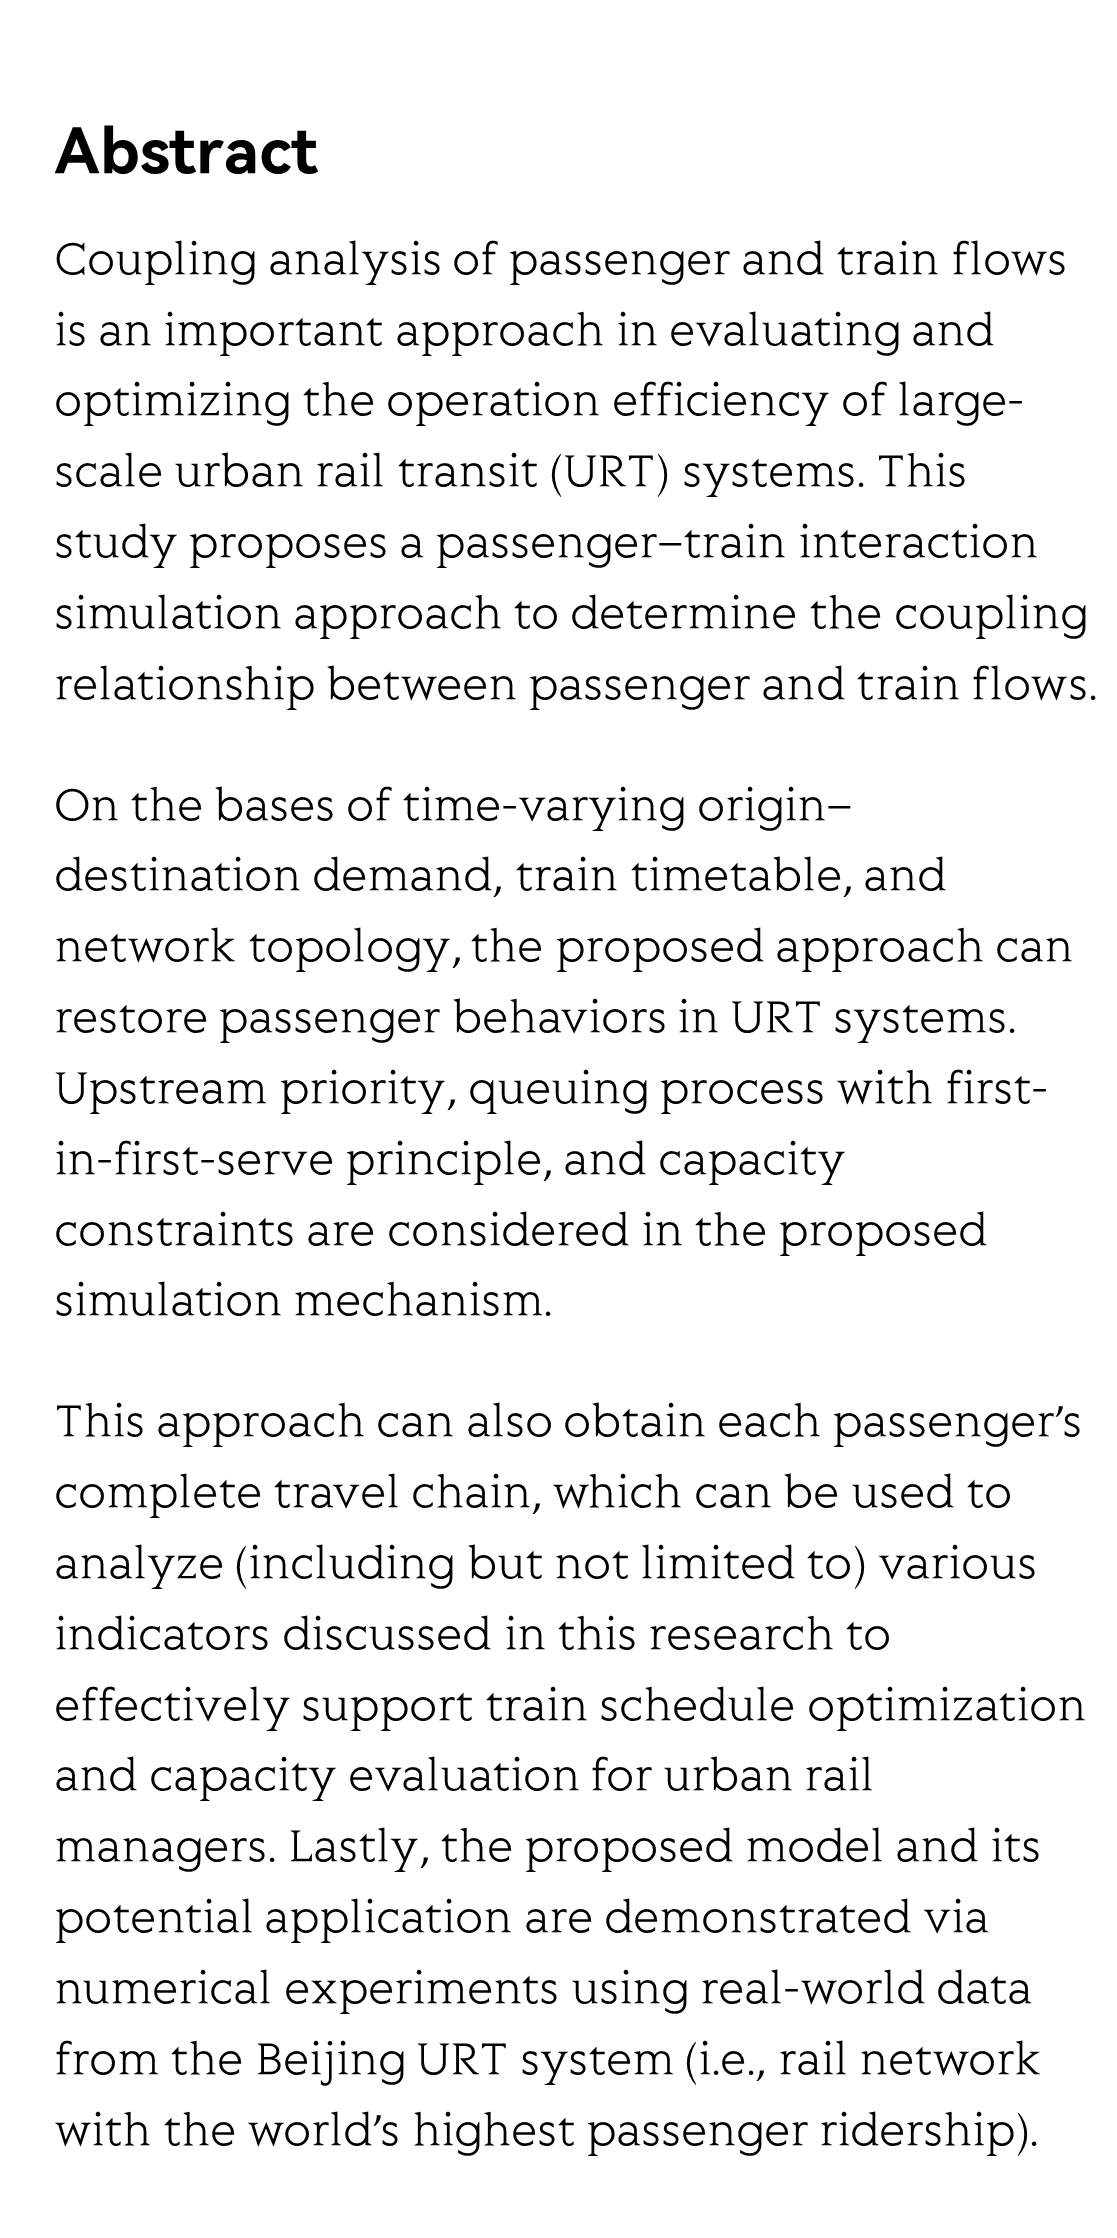 Coupling analysis of passenger and train flows for a large-scale urban rail transit system_2